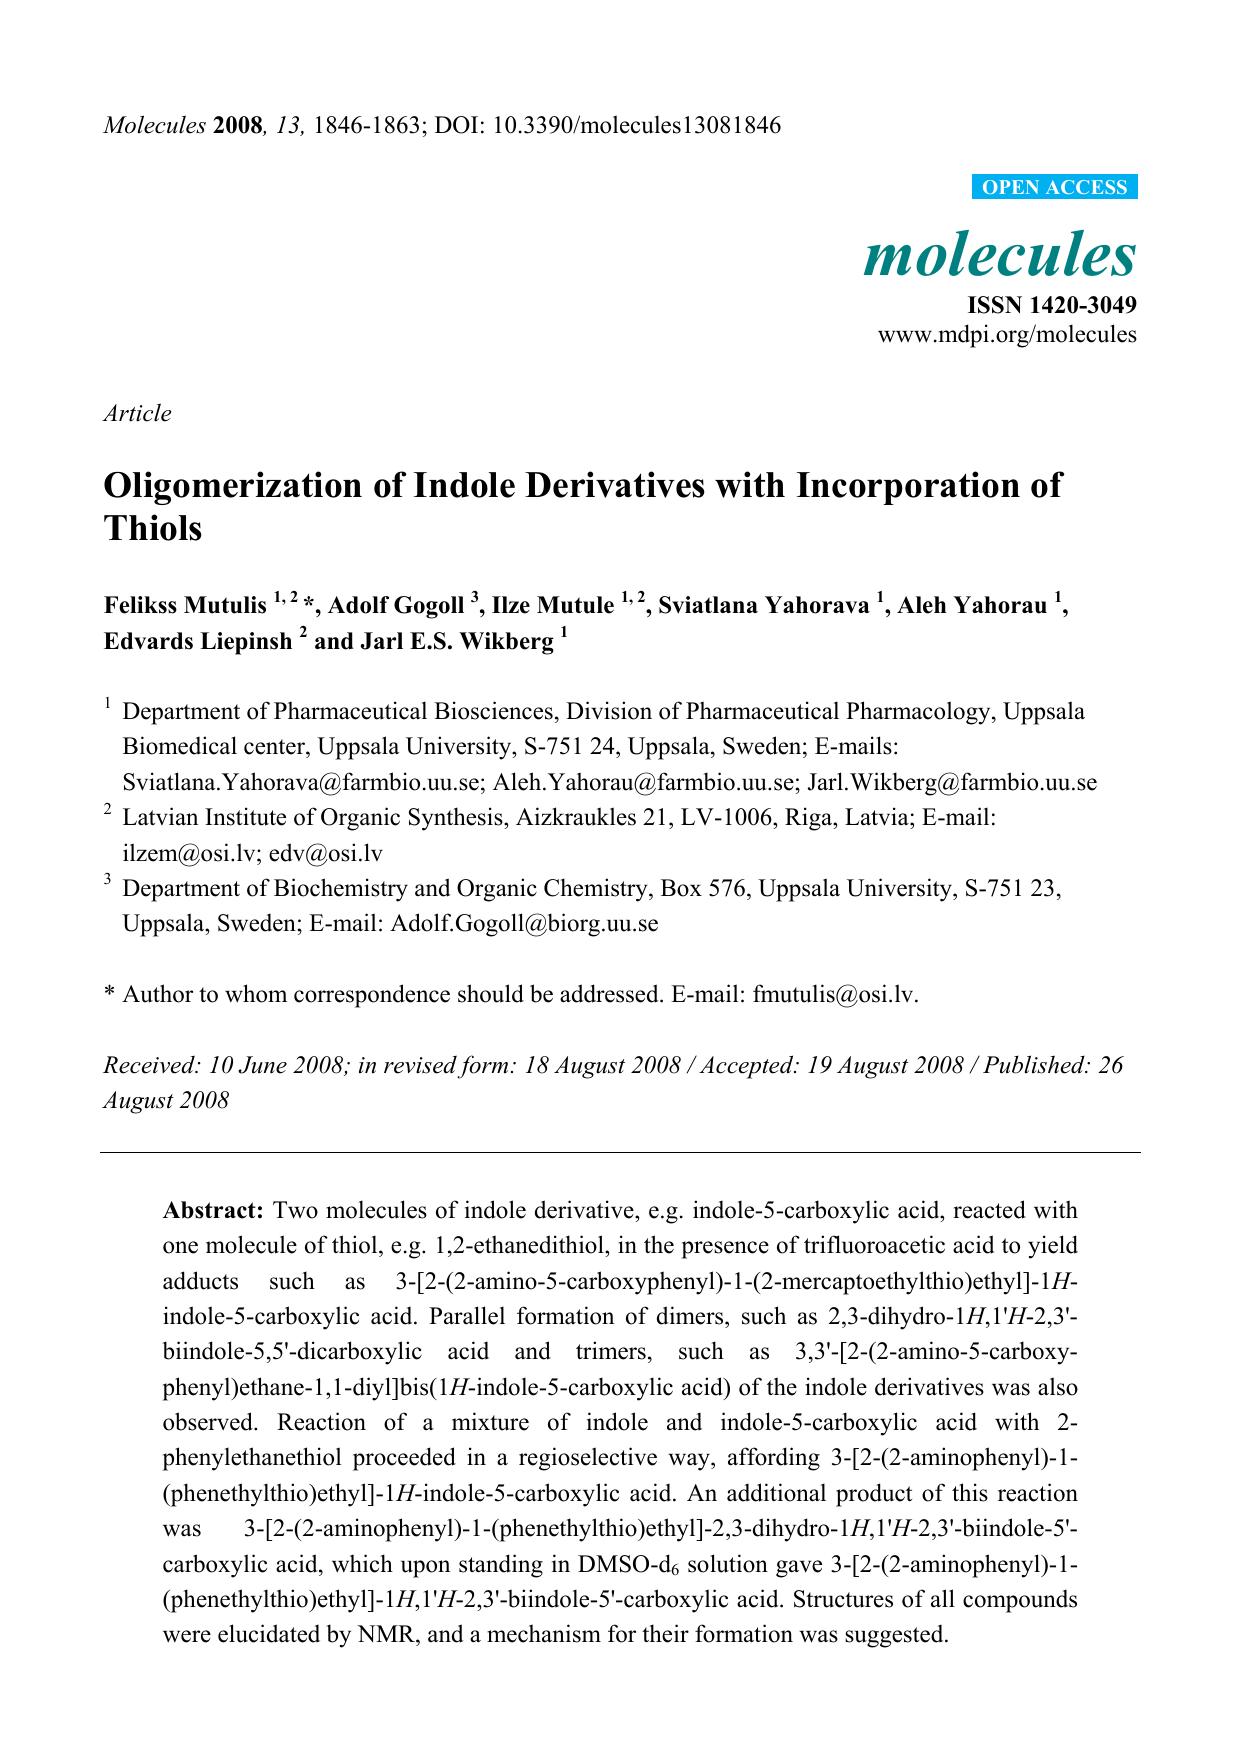 Oligomerization of Indole Derivatives with Incorporation of Thiols by unknow